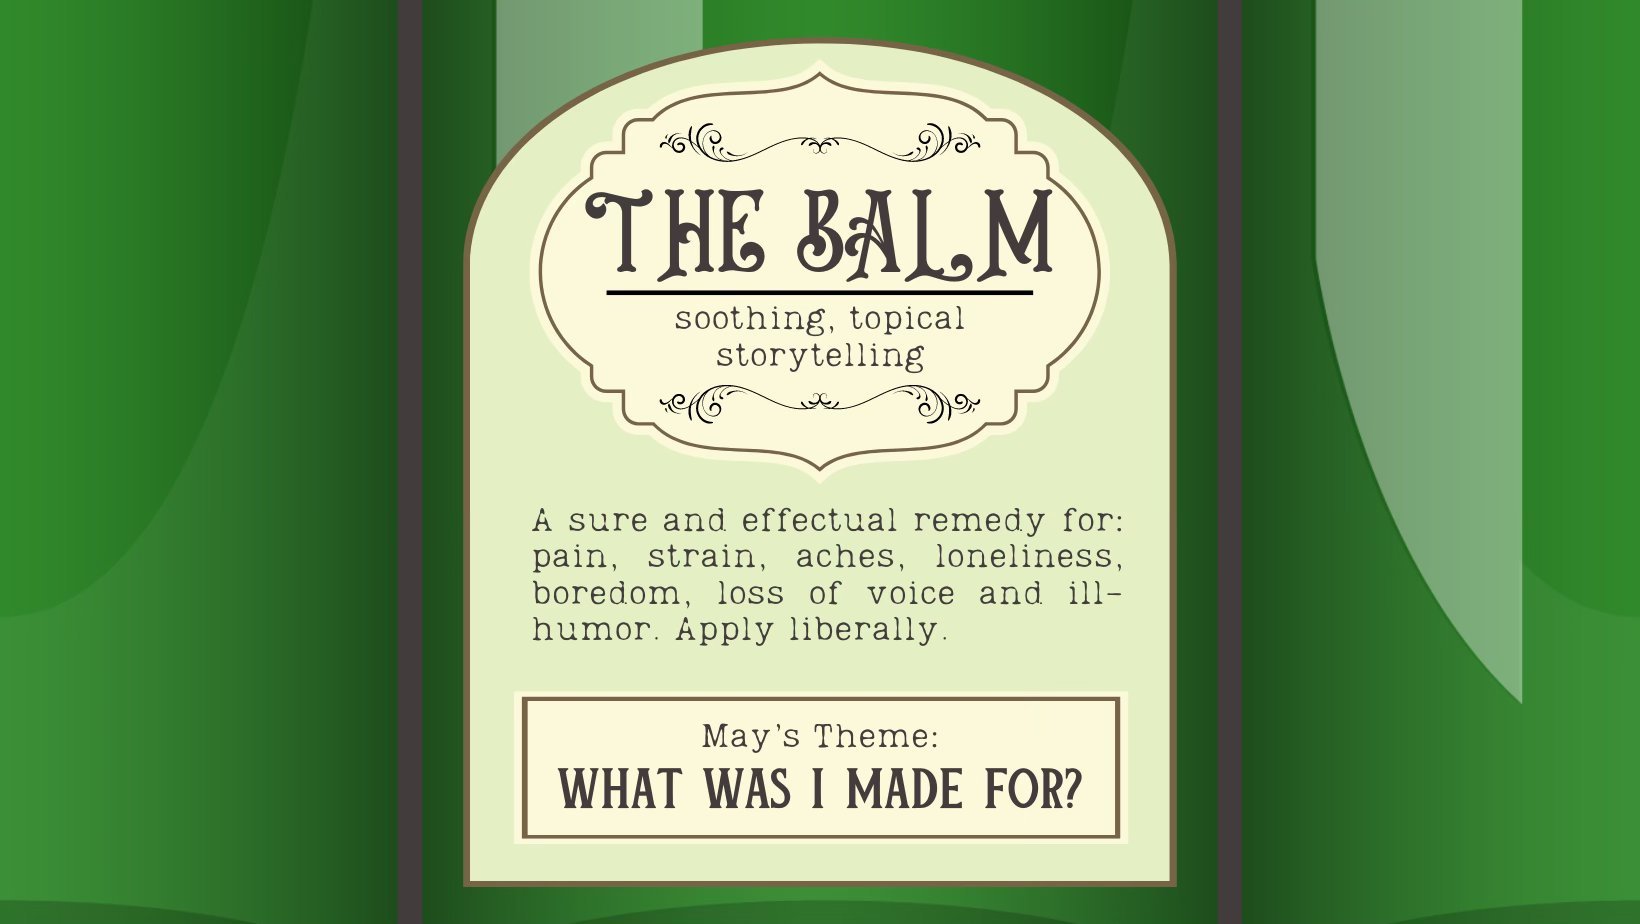 Get your daily dose of stories and community by visiting us on Sunday, May 5th for &quot;The Balm&quot; 5 p.m. at @mybuddyschicago (where else?!)

This month's theme is &quot;What Was I Made For&quot; stories of figuring out what the hell you're doin